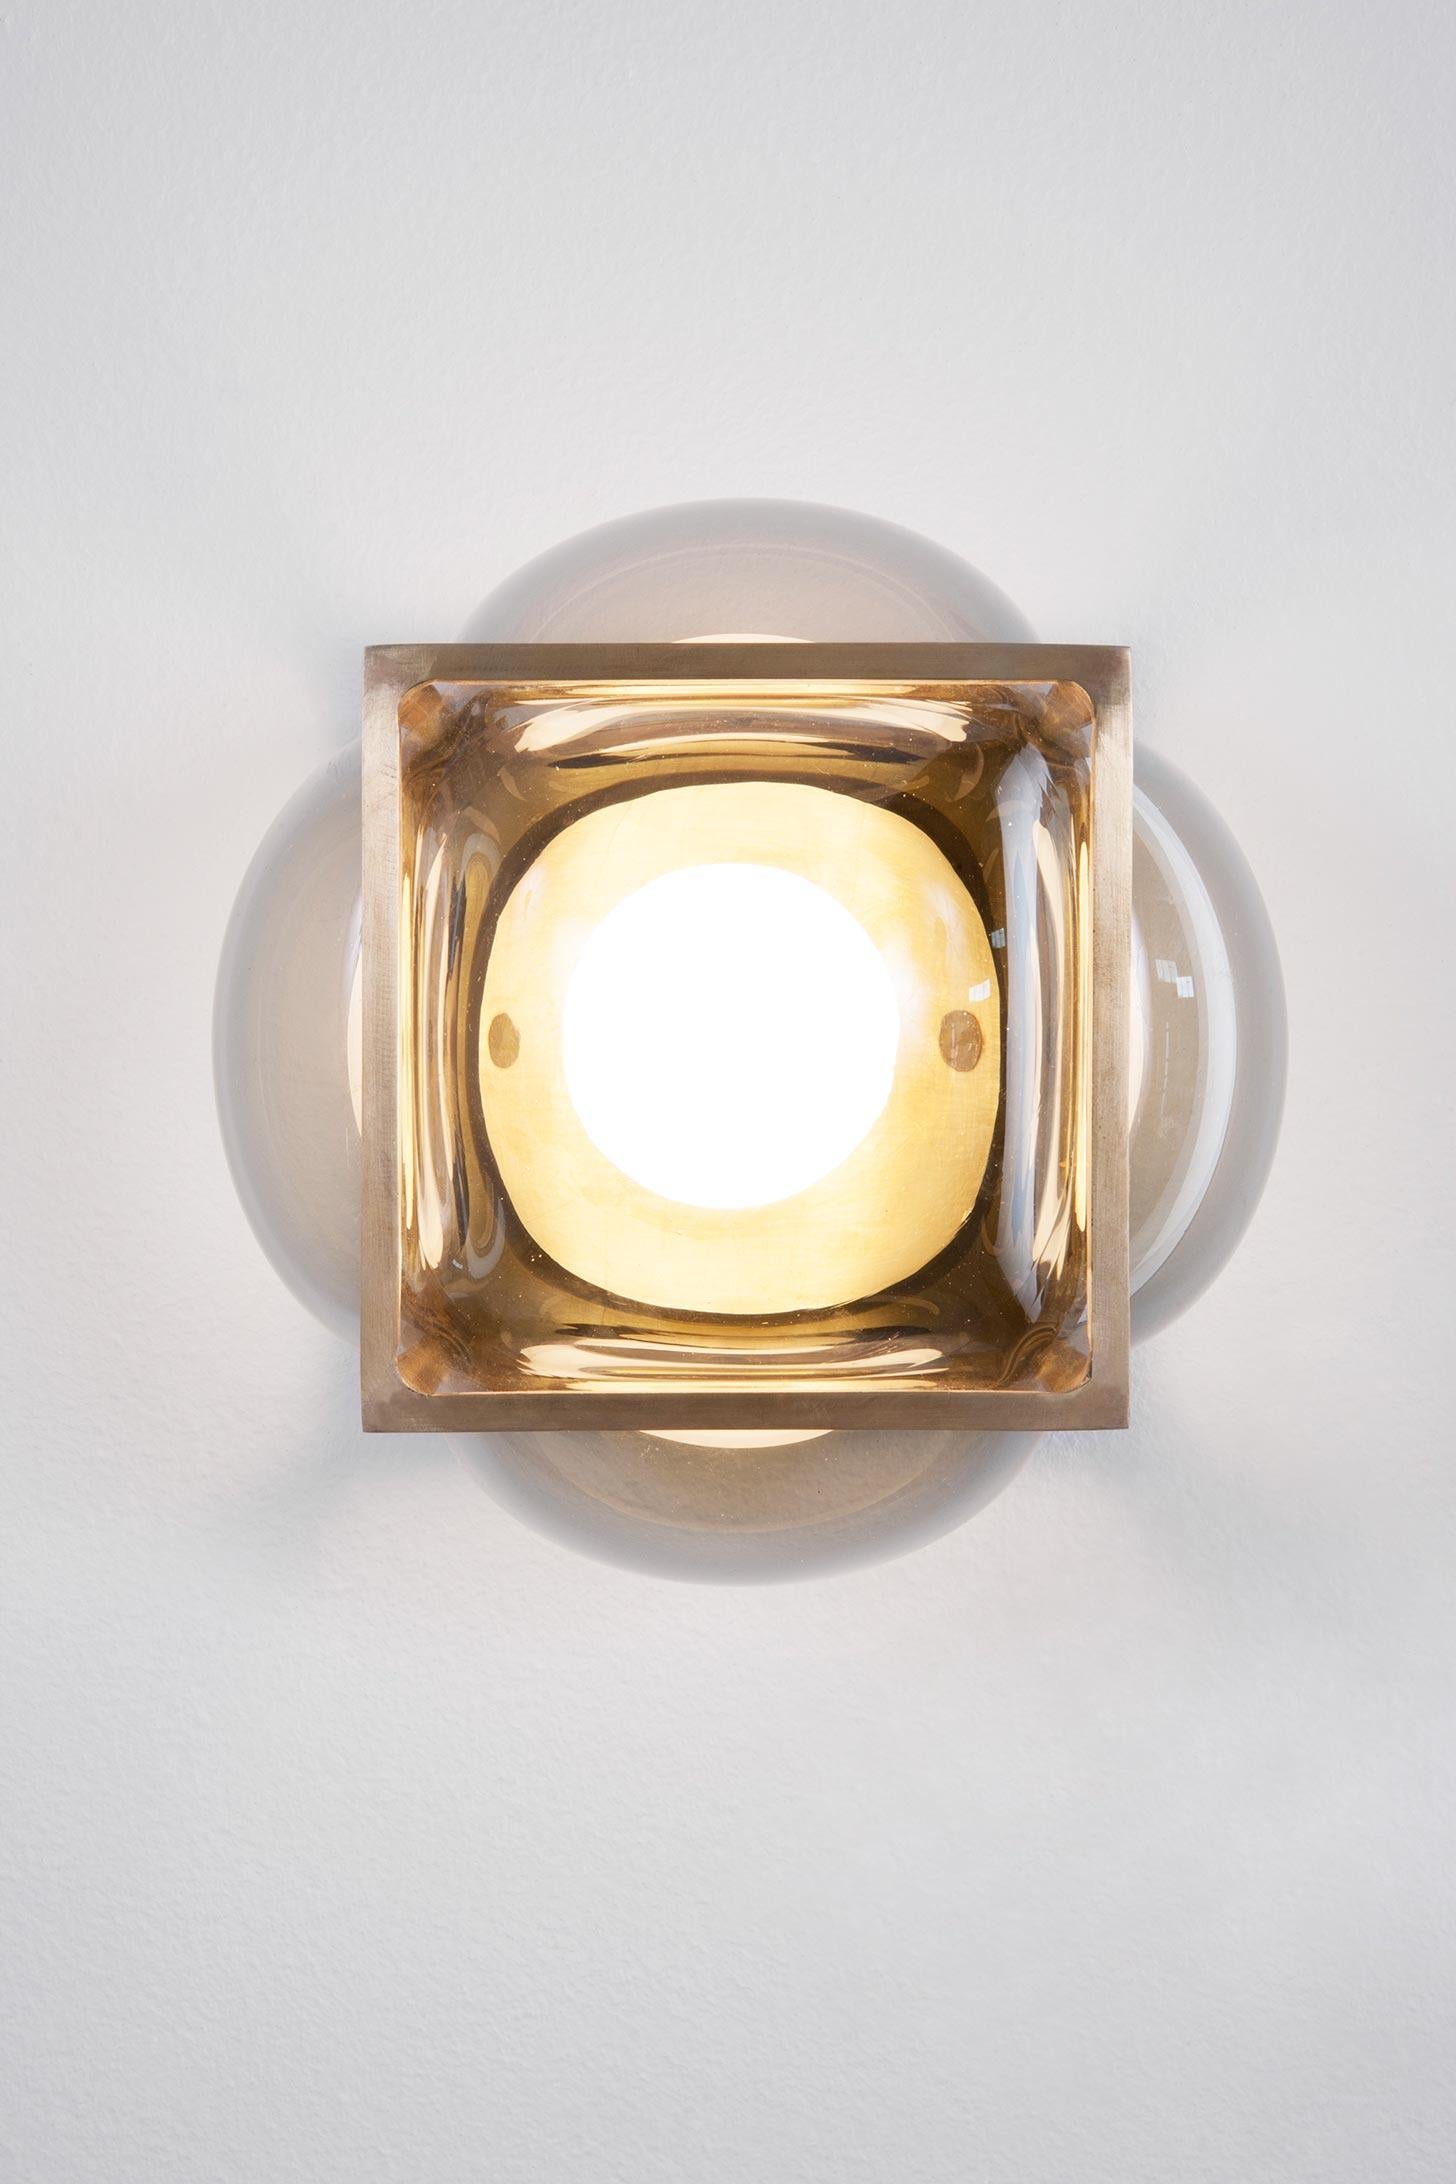 The Bulle can be used as a flushmount, a sconce or a tabletop fixture. The glass is hand blown into the solid brass frame. The hand blowed glass is available in either clear grey or opal white. Finish options for the metal frame are either blackened